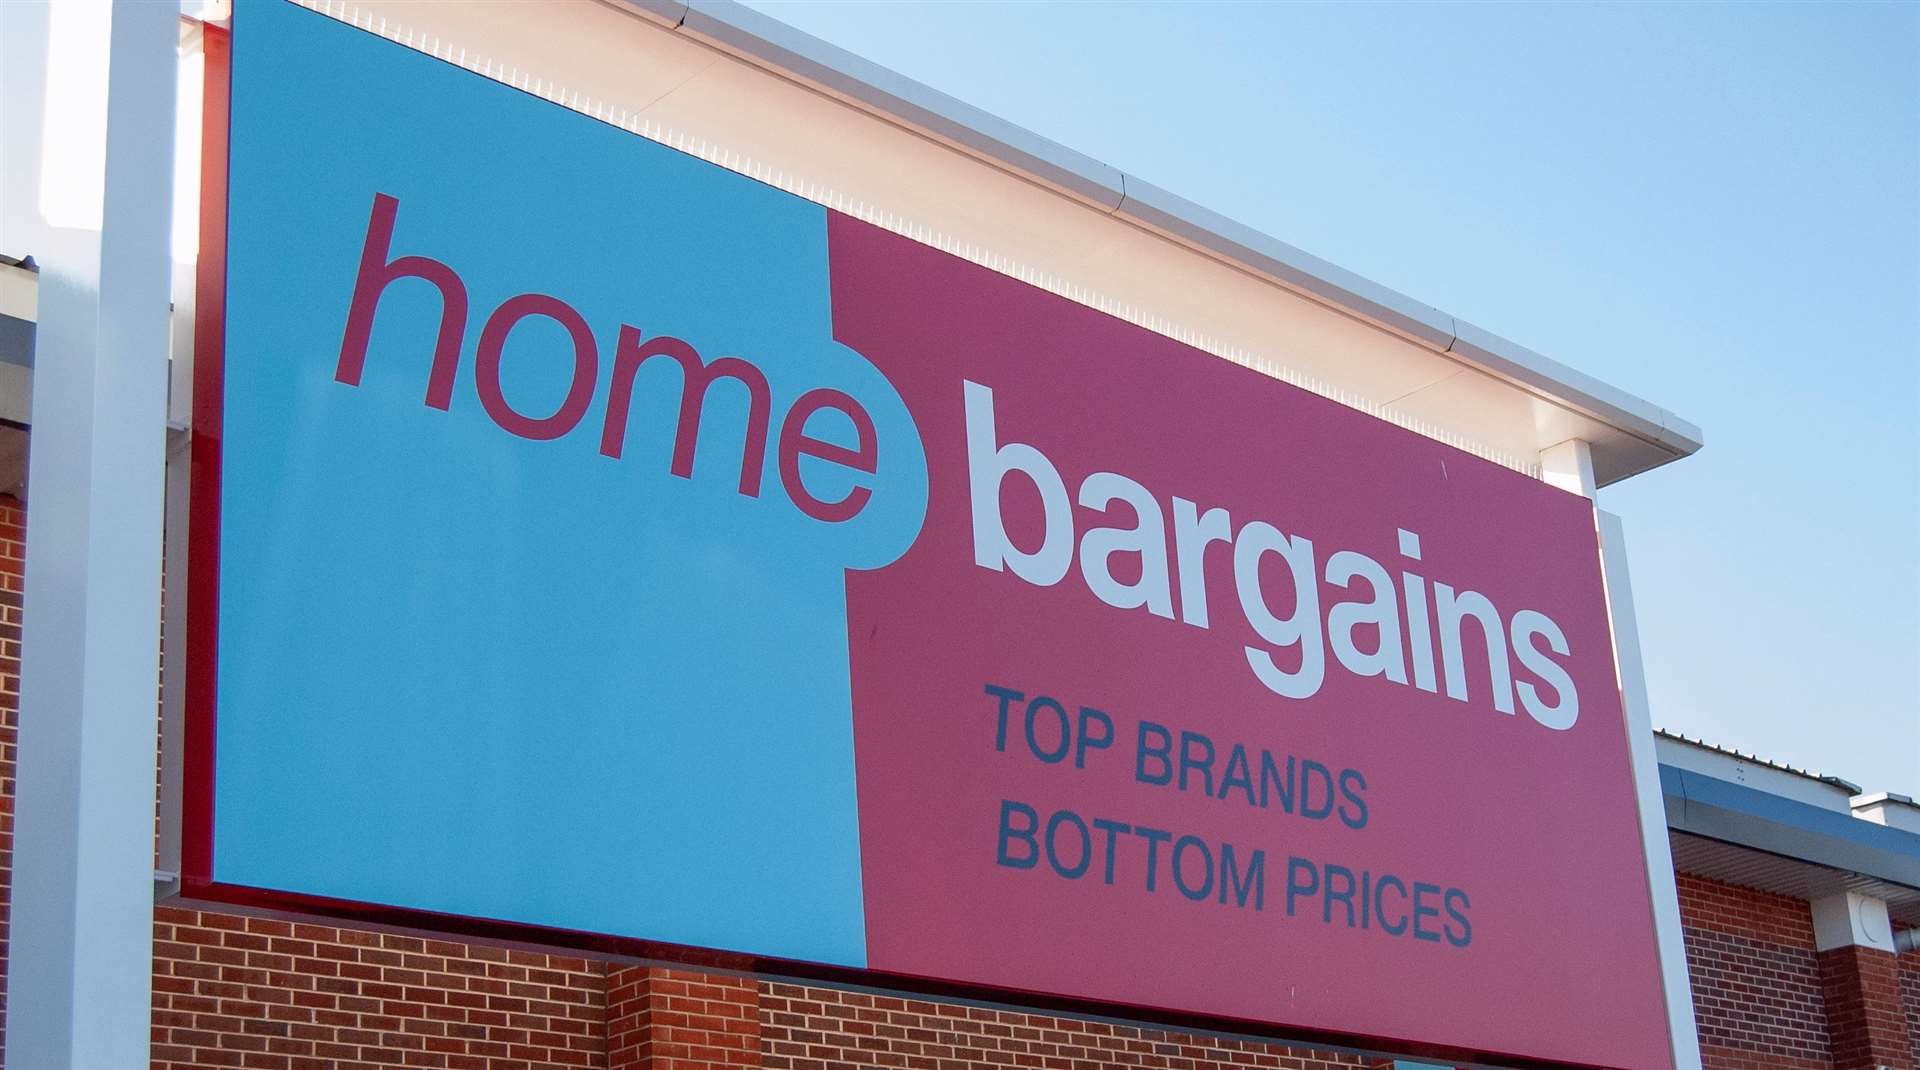 Home Bargains also wants to open a store at Hempstead Valley